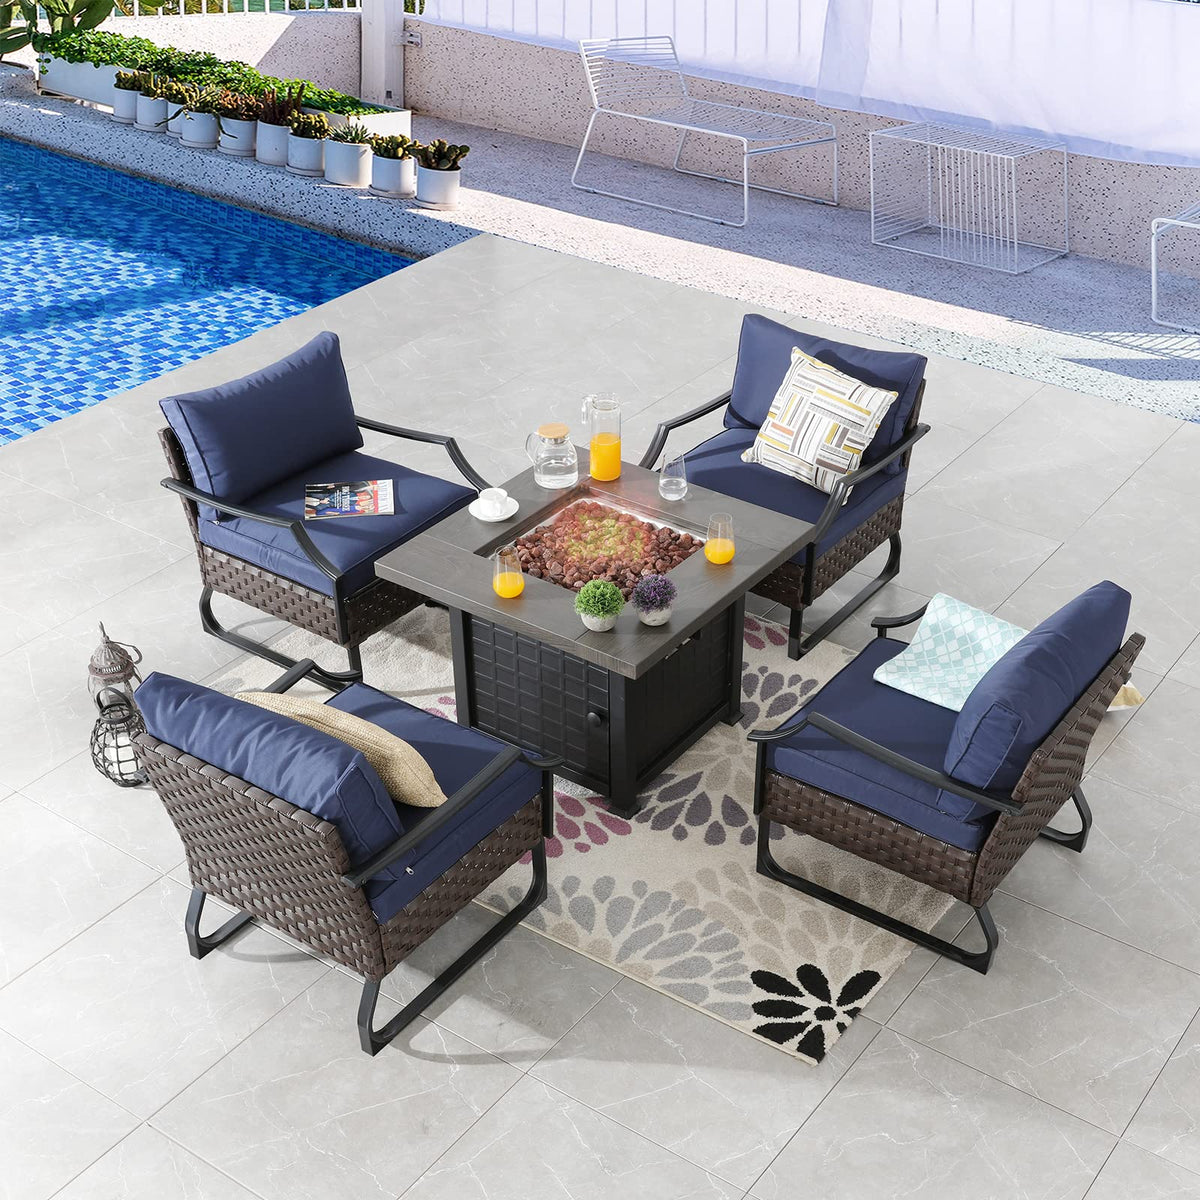 Festival Depot Fire Pit Table Set of Propane Fire Table and 4 Wicker Chairs with Thick Cushions for Patio Rattan Outdoor Furniture, CSA Certification, blue